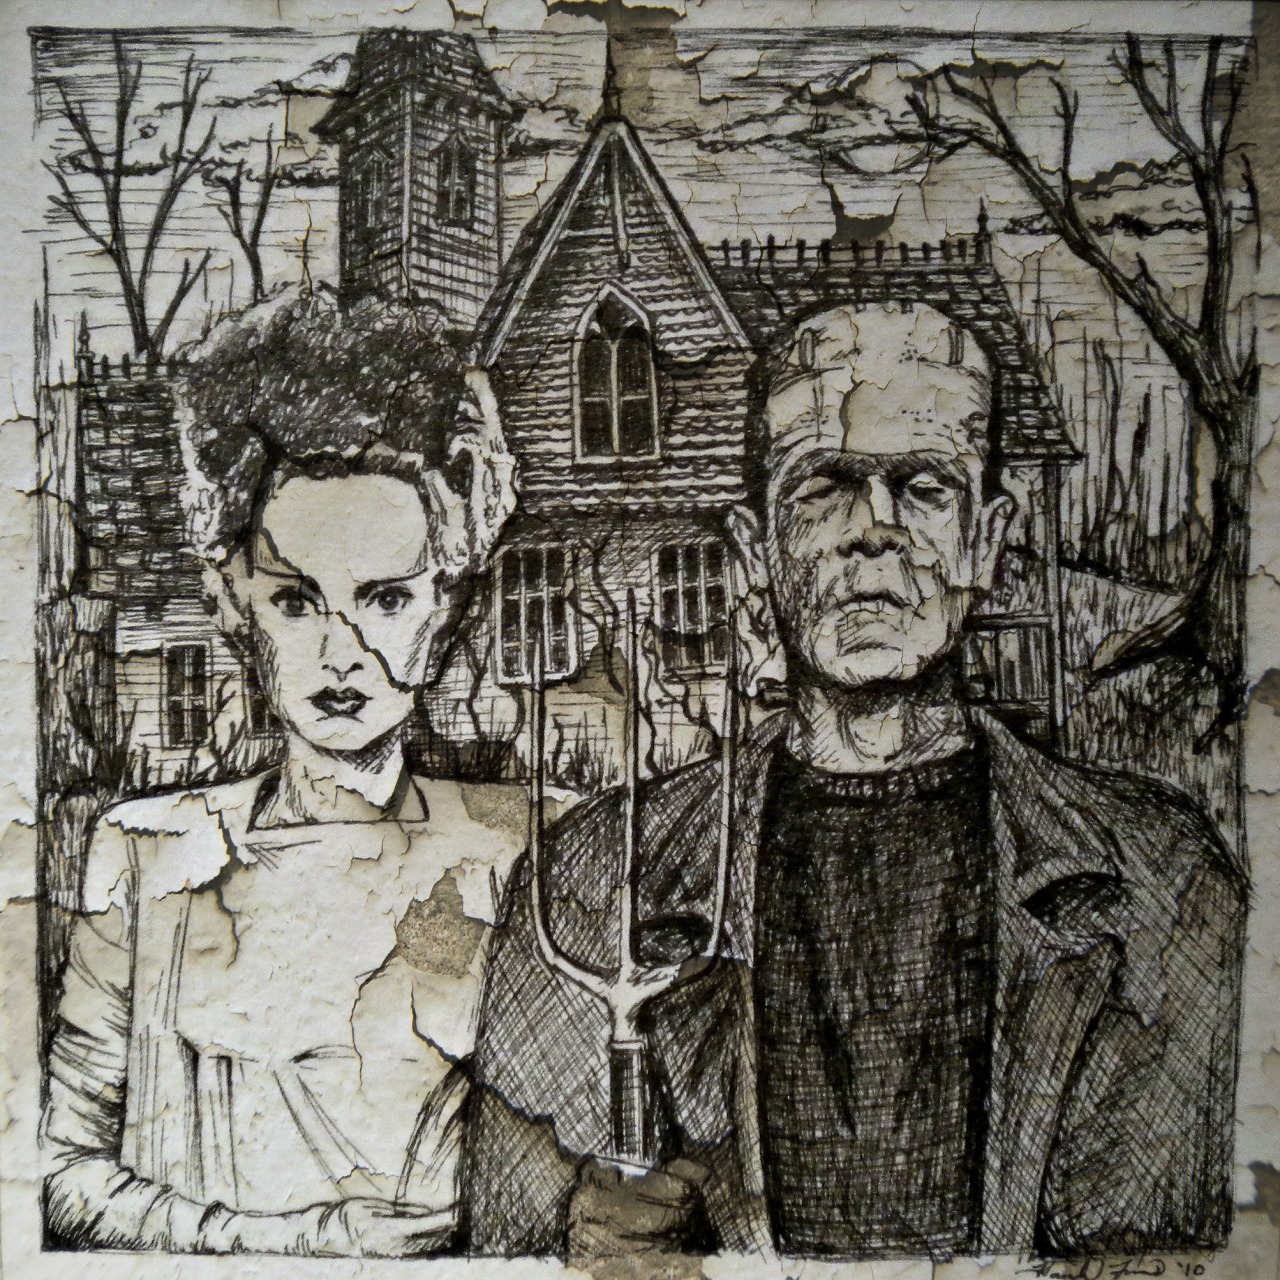 The first in a series of classic masterpieces as interpreted by classic universal monsters: Frankenstein’s American Gothic. See more and follow at http://hannahbpacious.tumblr.com/